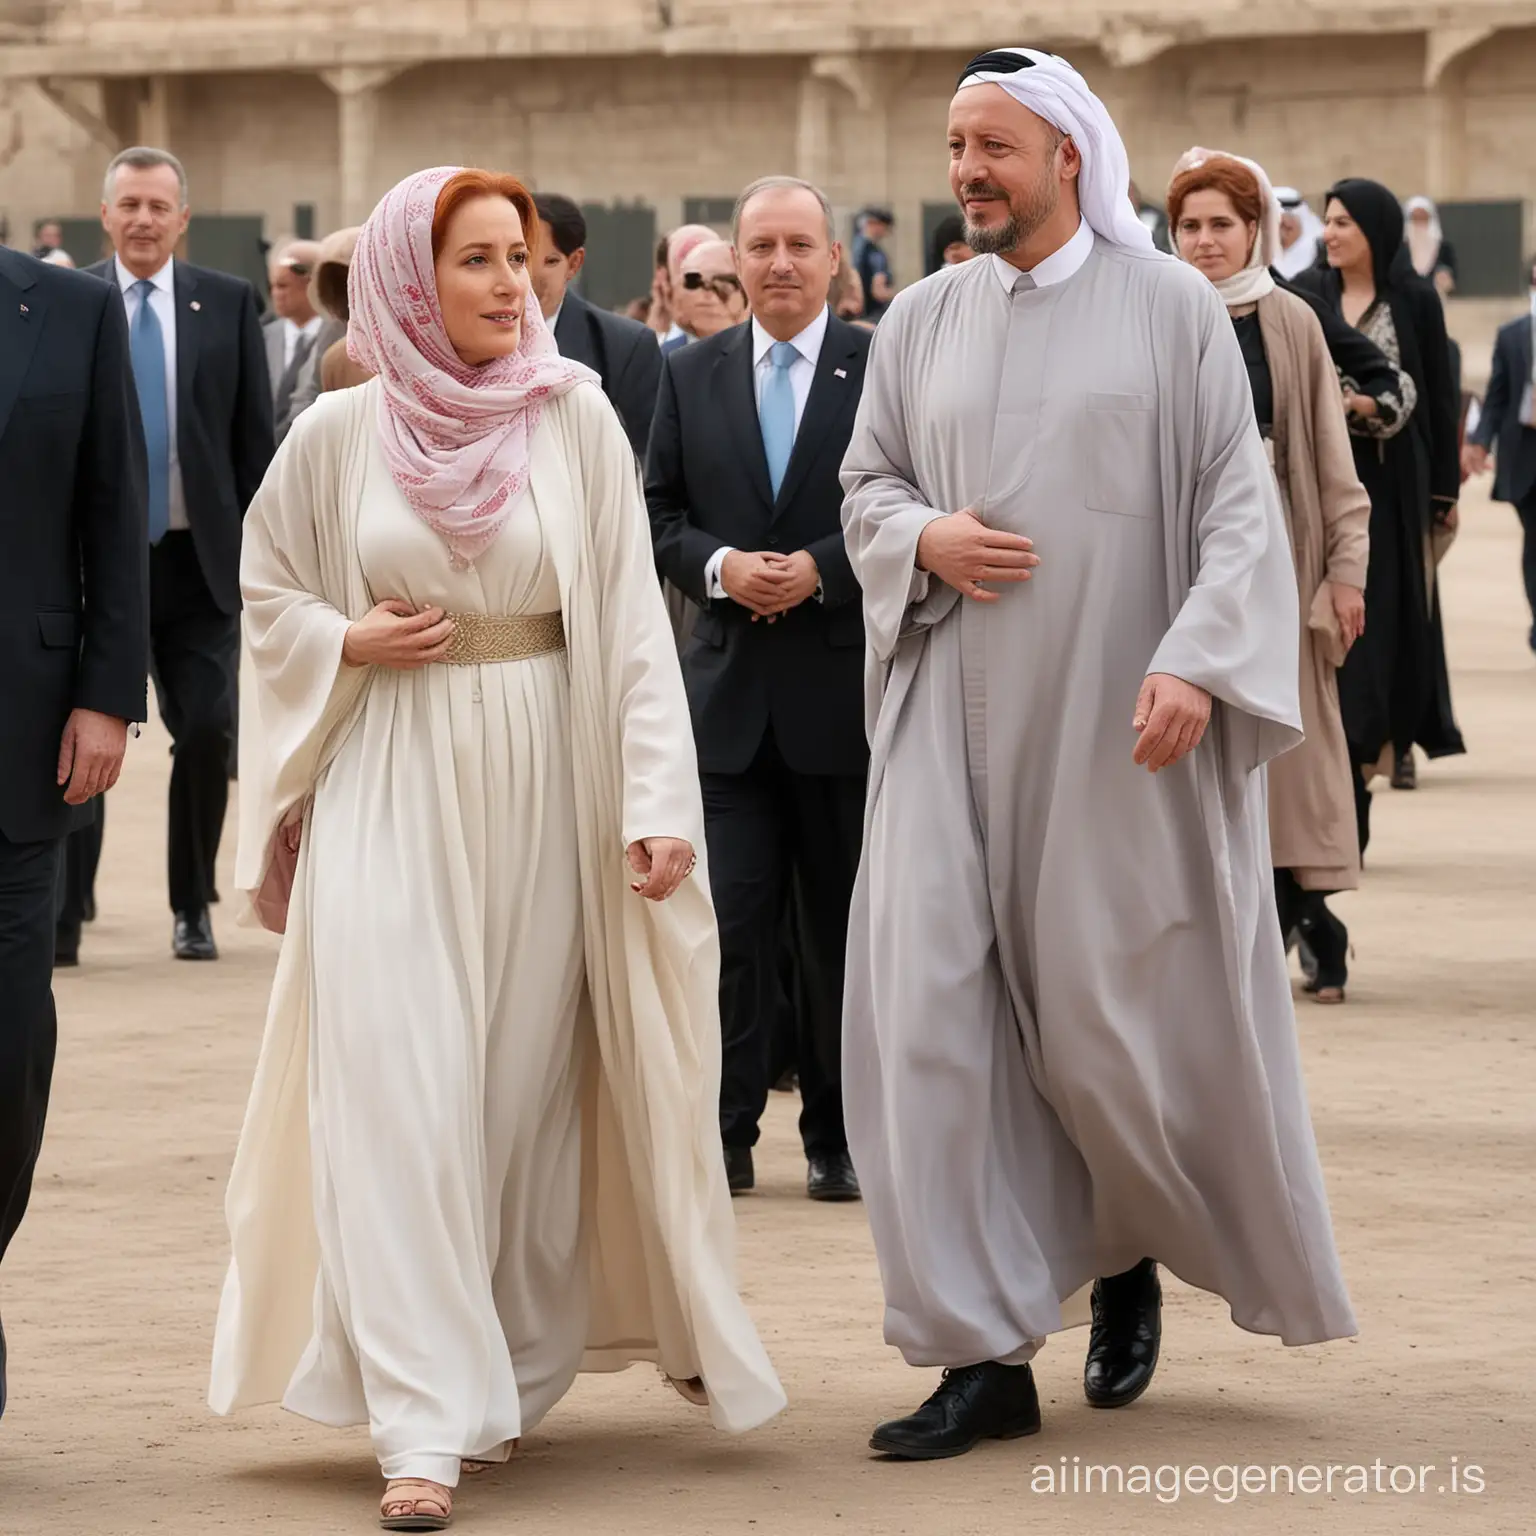 red haired Gillian Anderson wearing a hijab with floor length jilbab and long flowing outer abaya strolling hand in hand with president Erdogan